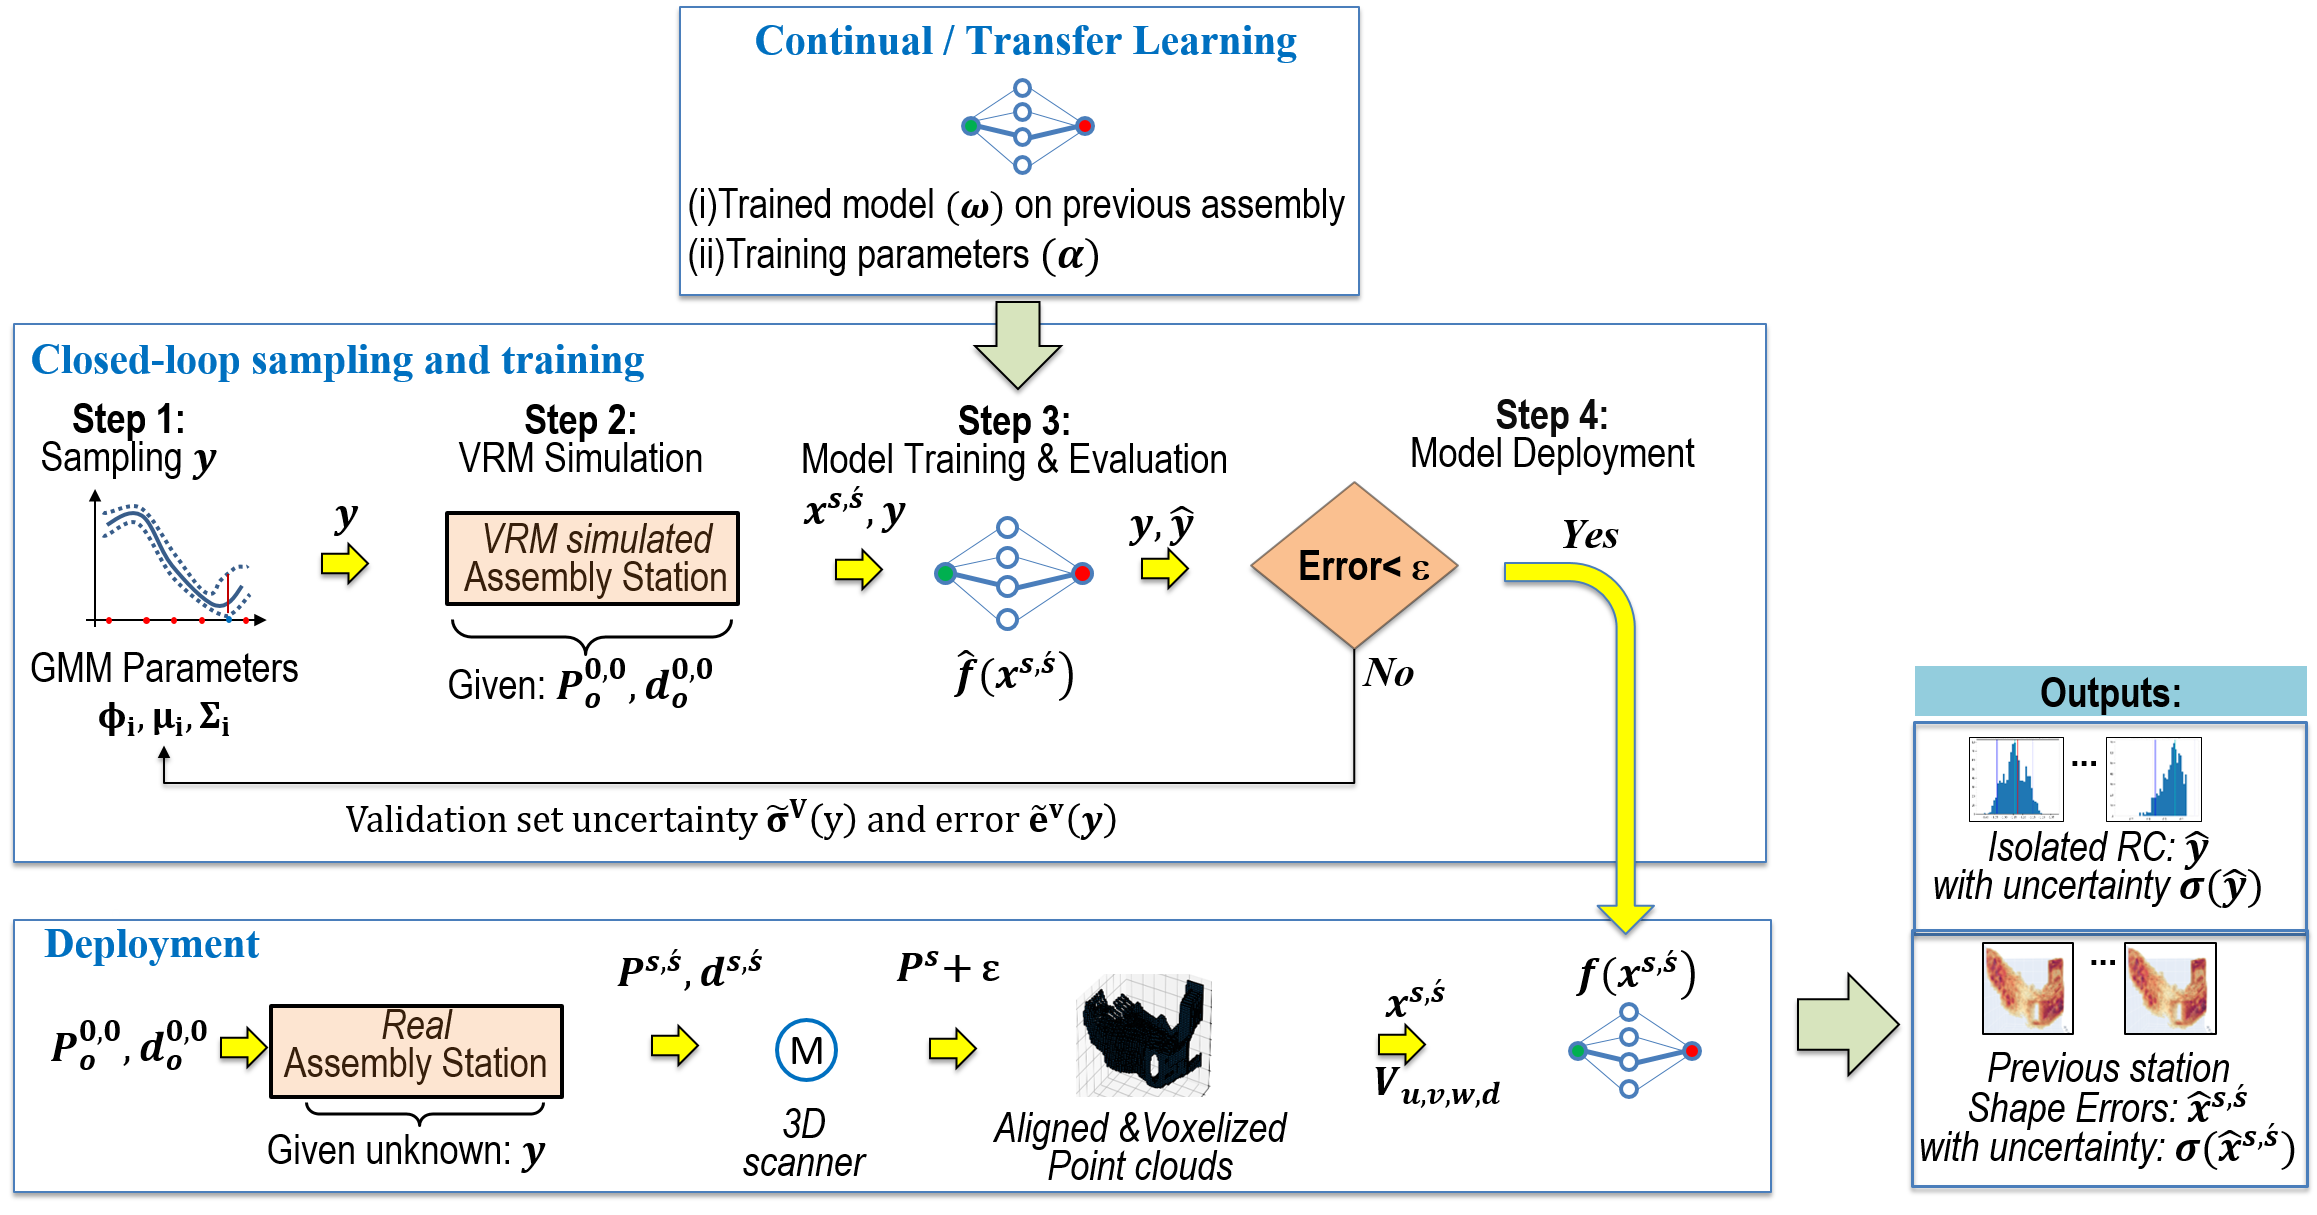 Bayesian Deep Learning for Manufacturing (dlmfg): Documentation